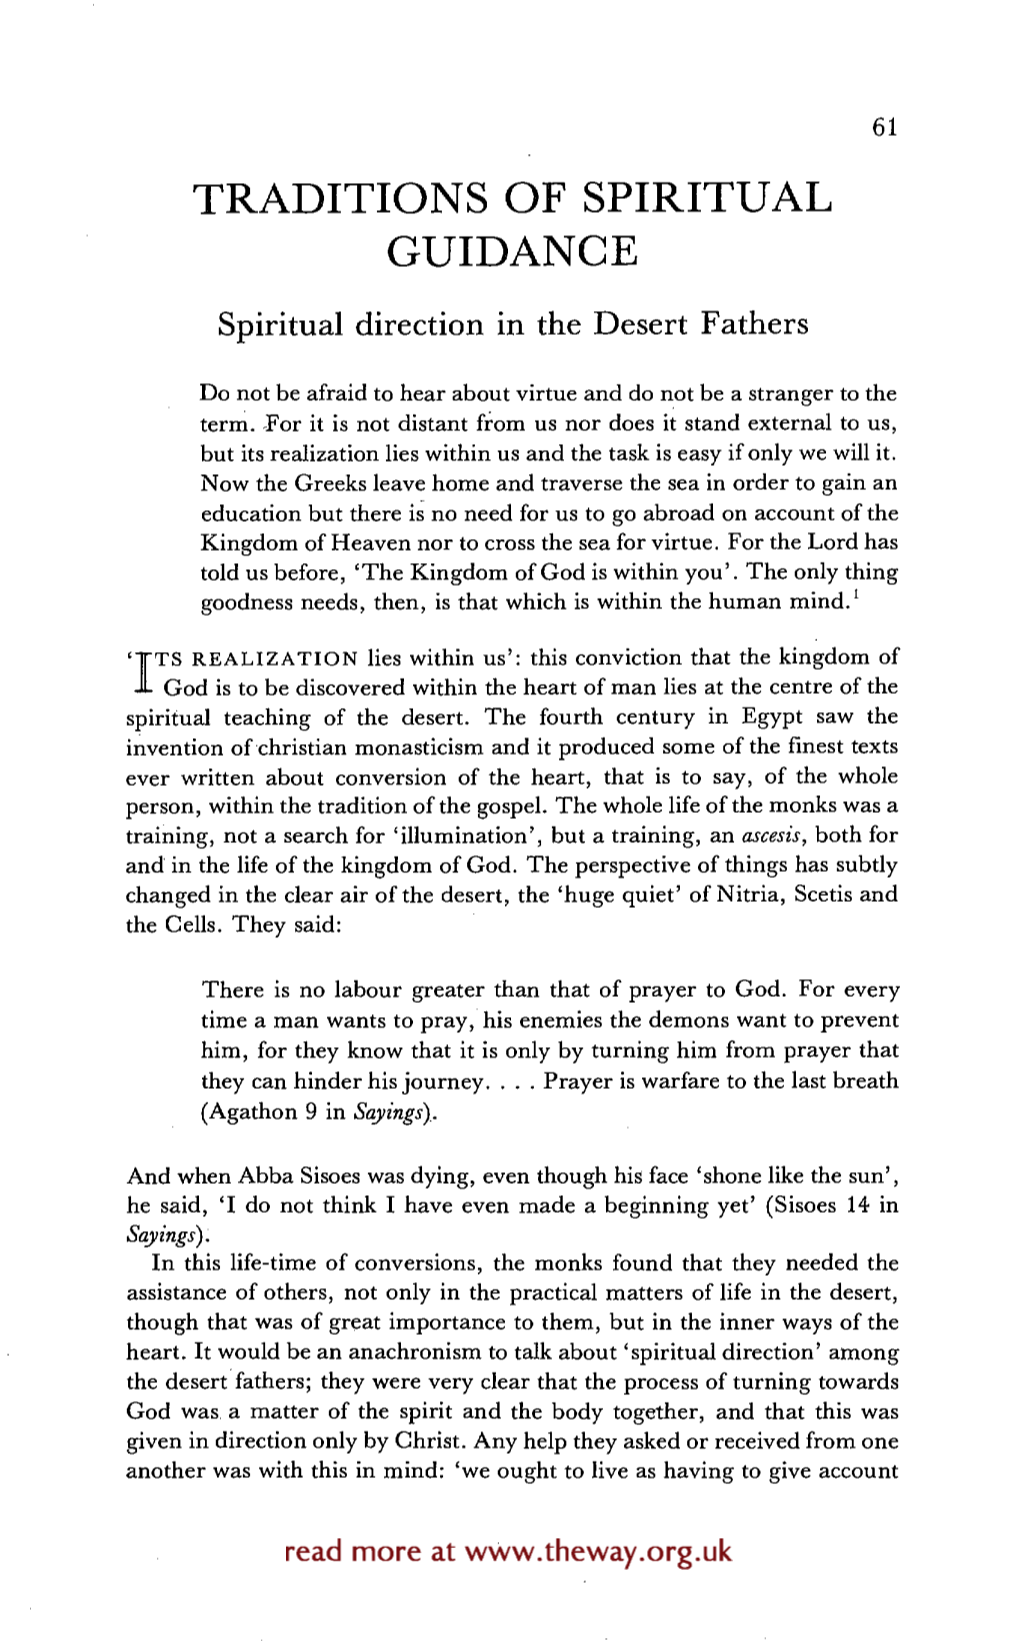 Spiritual Direction in the Desert Fathers